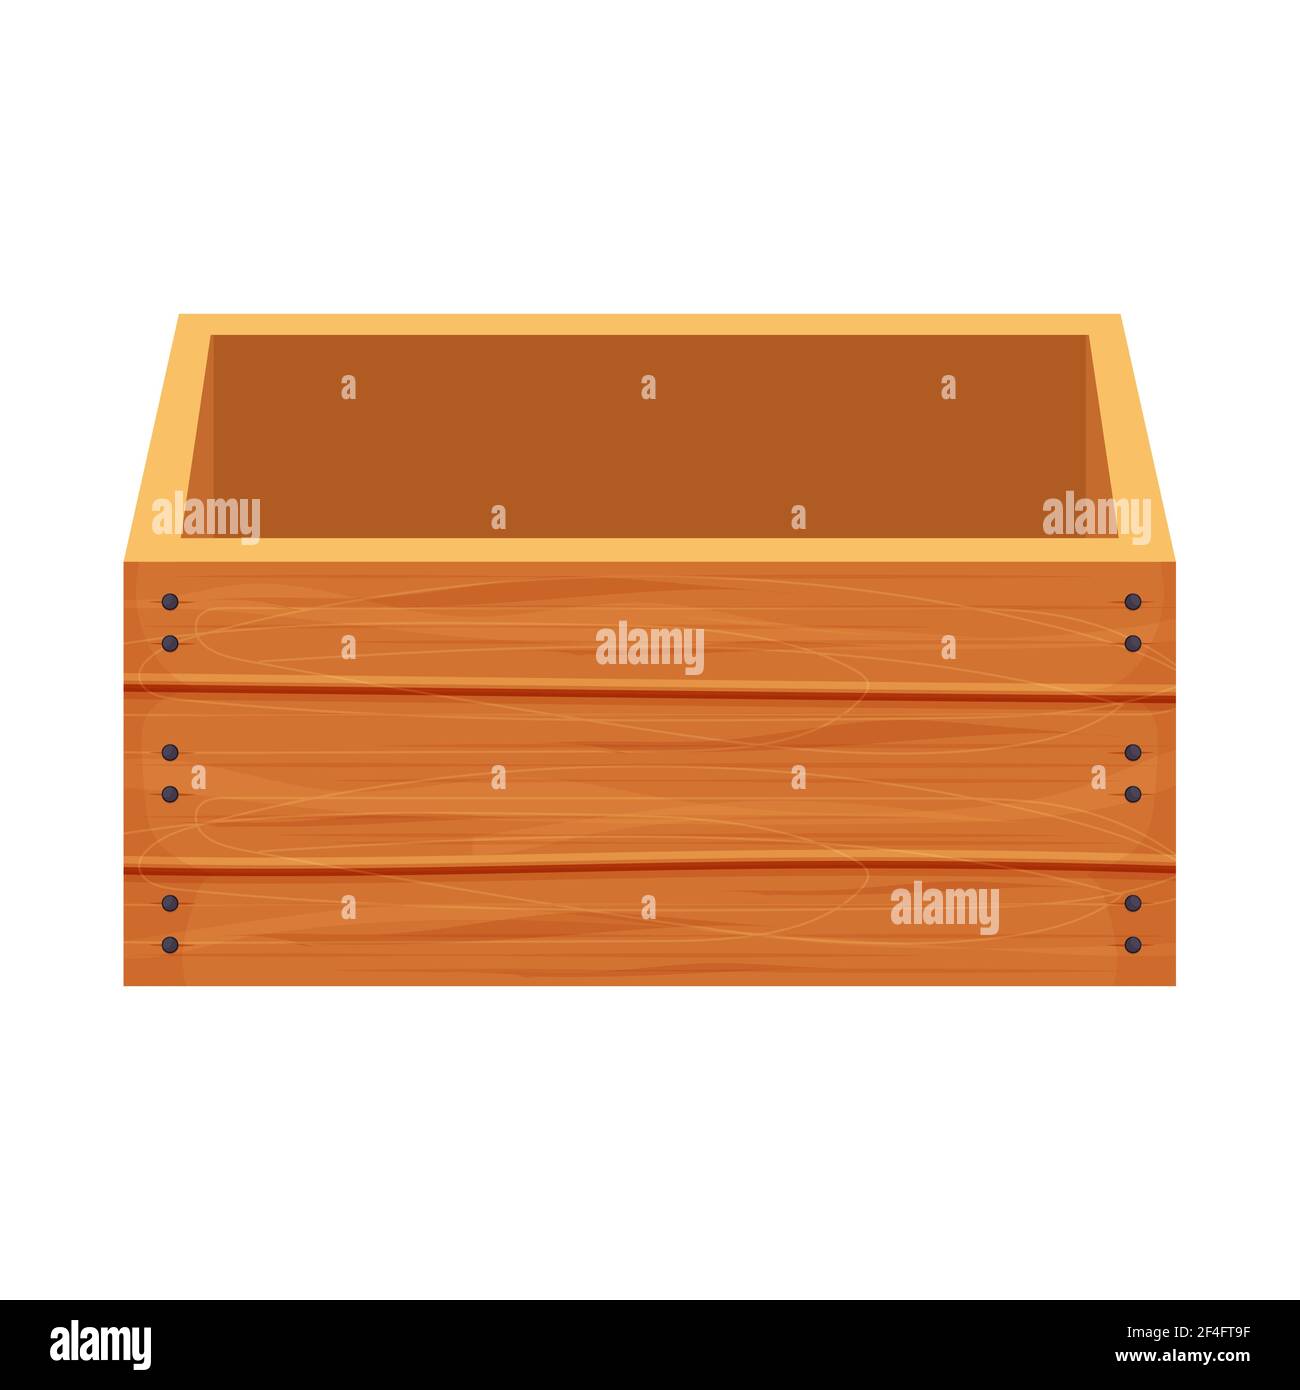 Wooden box, container in cartoon style isolated on white background stock vector illustration. Empty cargo, open object, design element. Rural texture Stock Vector